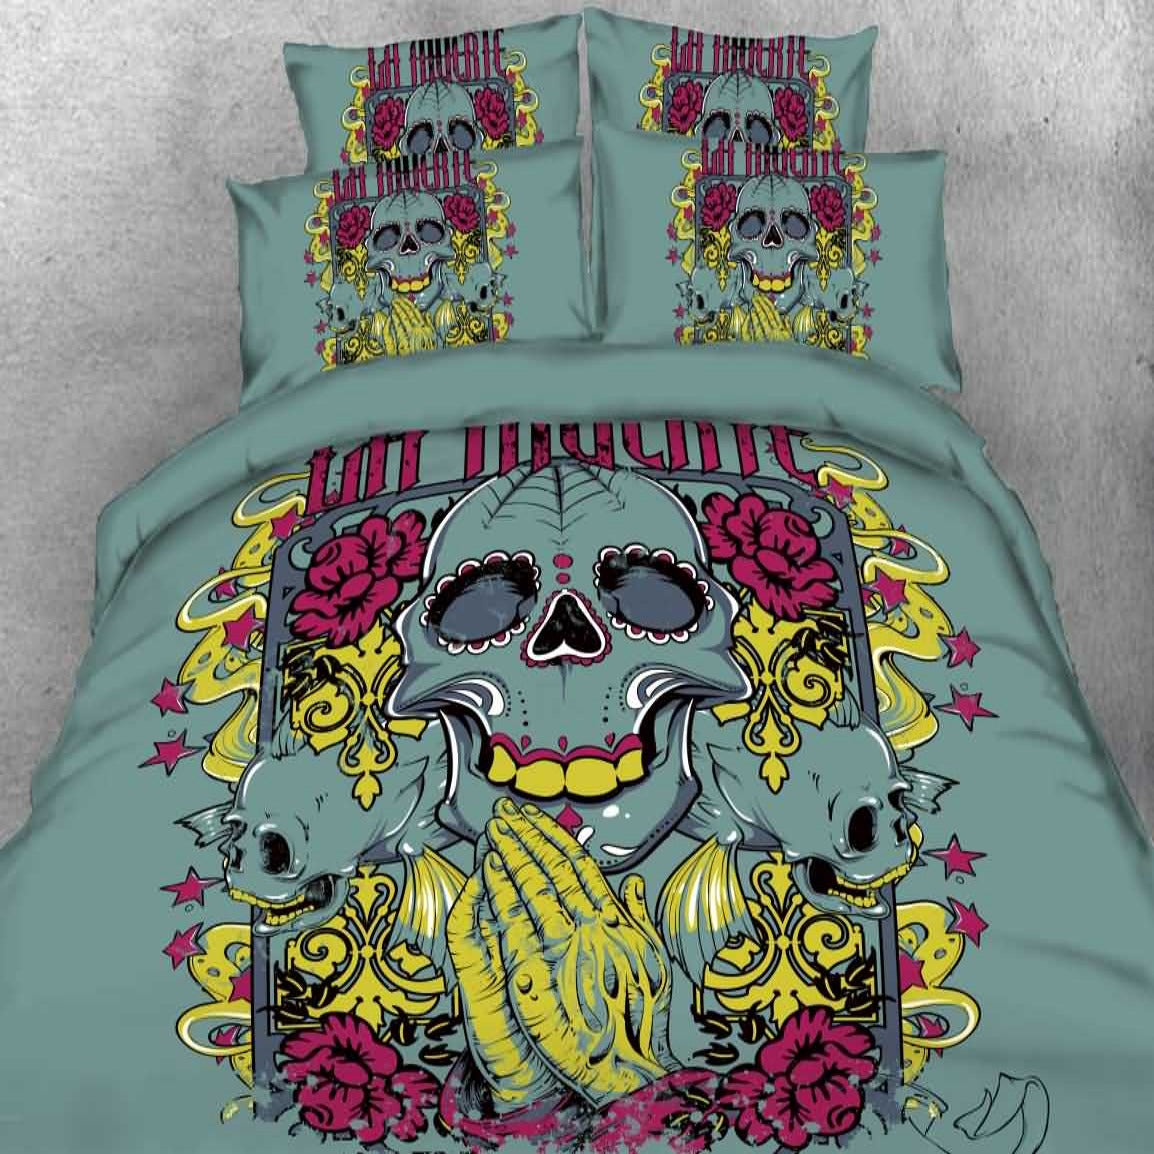 Gothic Bedding Set, Skull Printed 4-Piece Duvet Cover Set Microfiber with Flat Sheet 2 Pillowcases